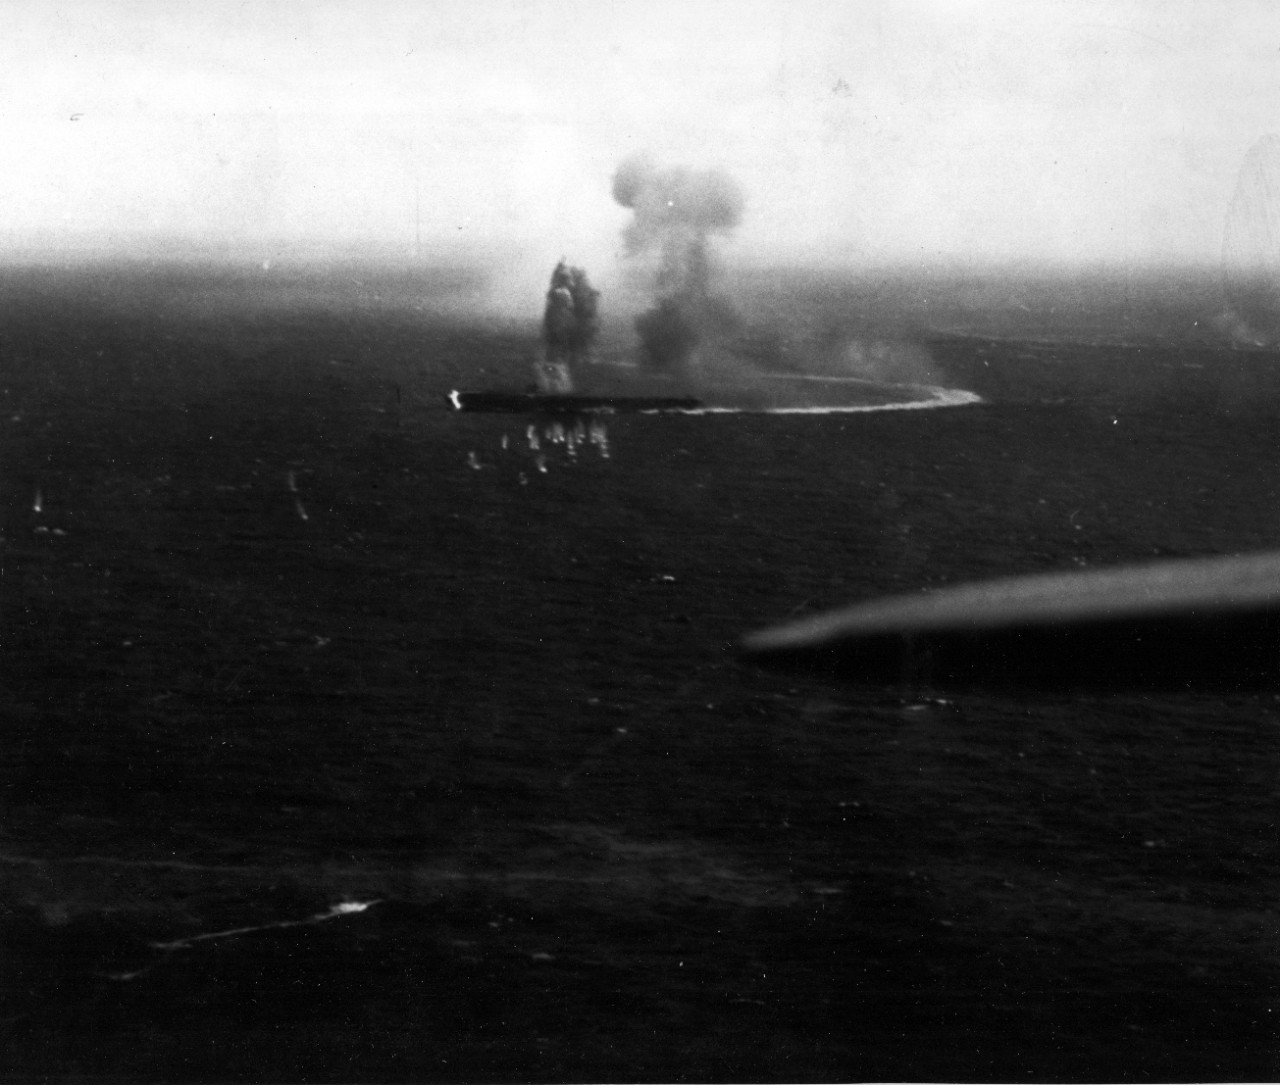 Photo #: 80-G-17030  Battle of Coral Sea, May 1942